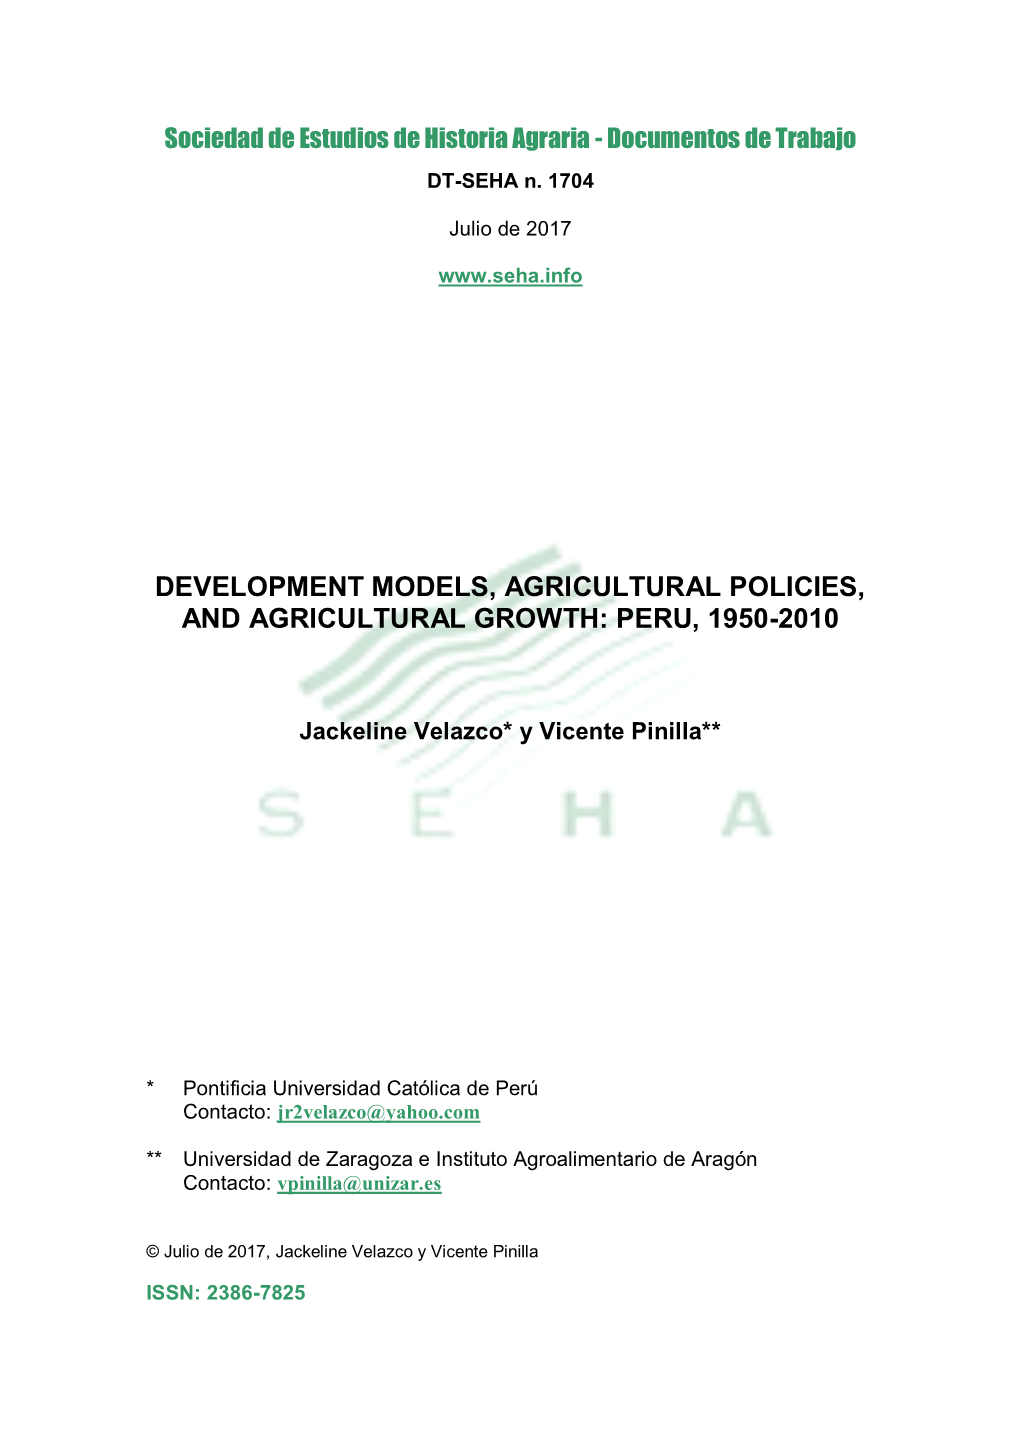 Development Models, Agricultural Policies, and Agricultural Growth: Peru, 1950-2010